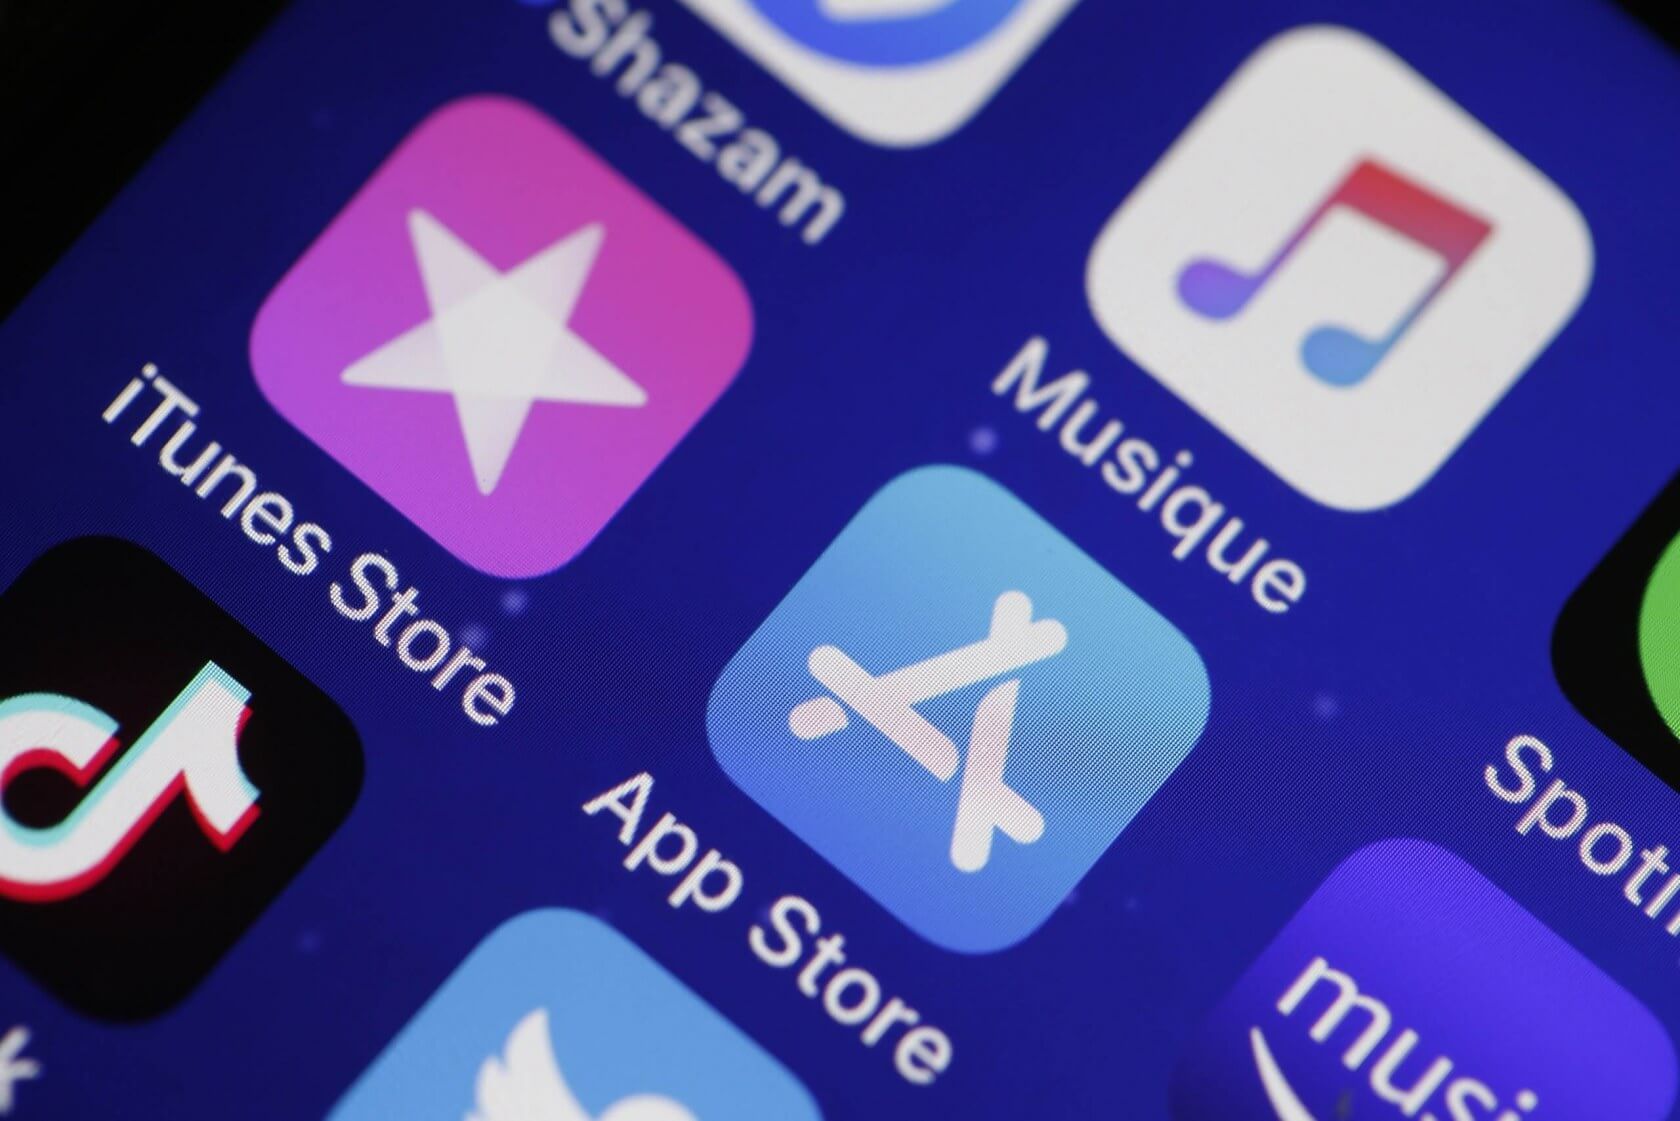 iOS 14 could let users access small parts of apps without installing them